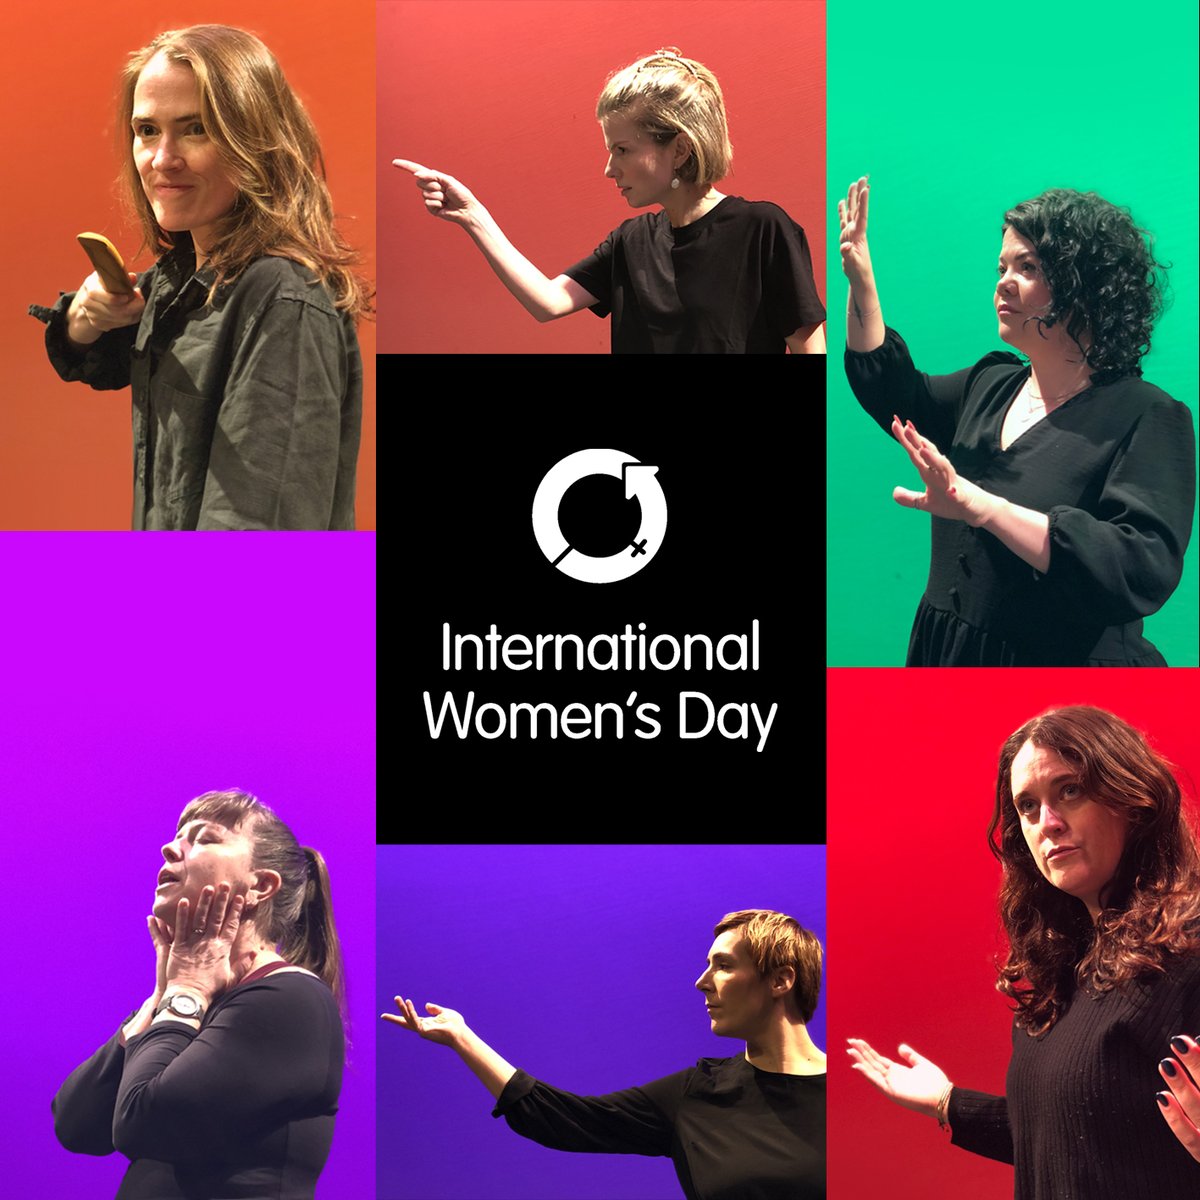 CELEBRATING INTERNATIONAL WOMEN'S DAY: SIX HEROINES! Tonight is the opening night of SIX HEROINES, and it's also International Women's Day! We hope you'll join us over the next two nights celebrating these six extraordinary women of myth! artscentre.je/whats-on/six-h…